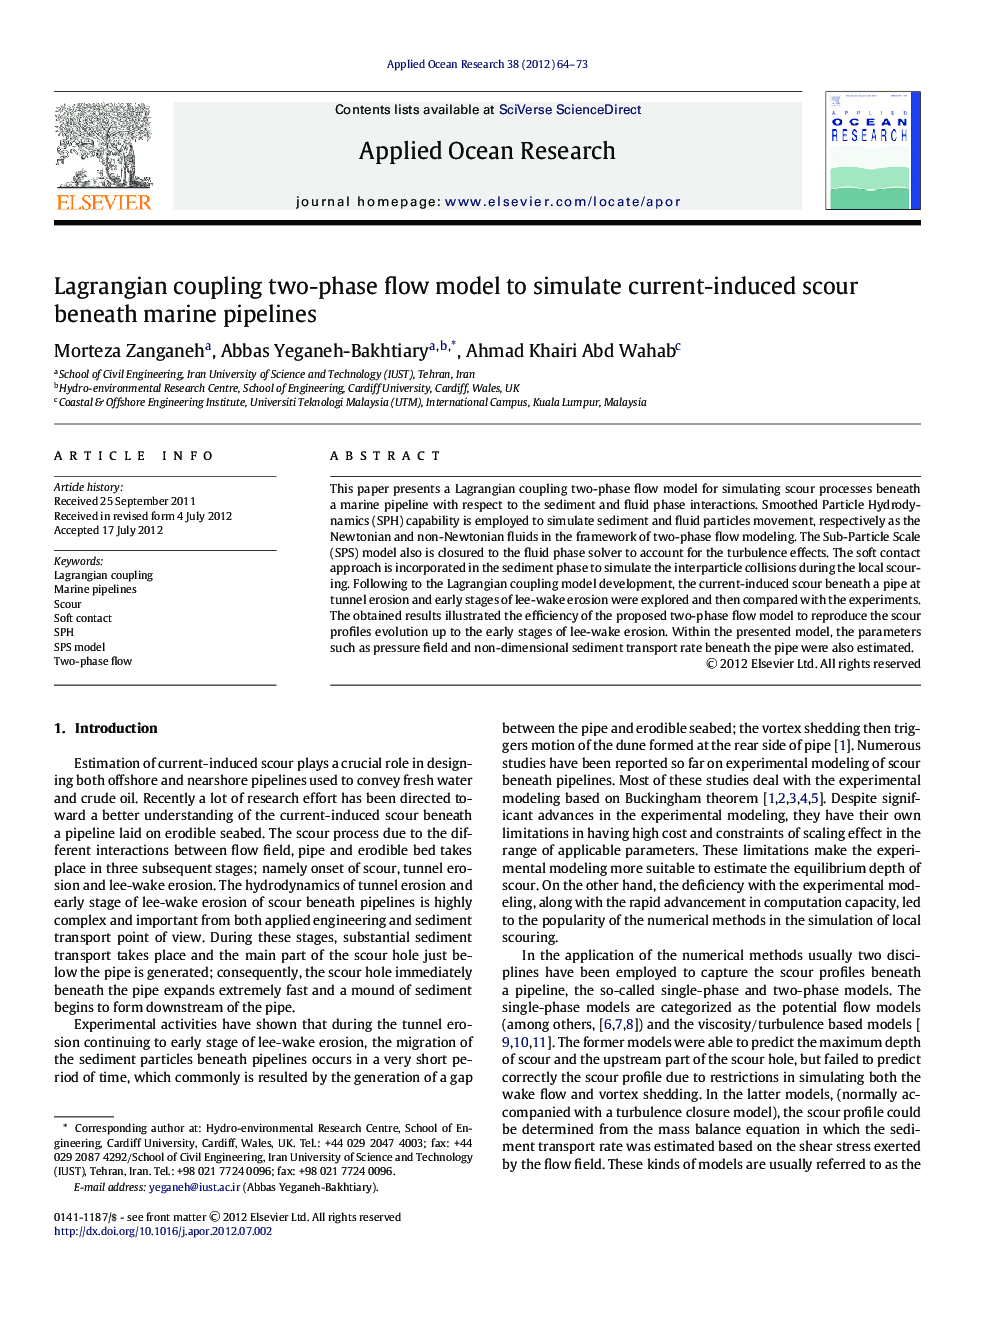 Lagrangian coupling two-phase flow model to simulate current-induced scour beneath marine pipelines